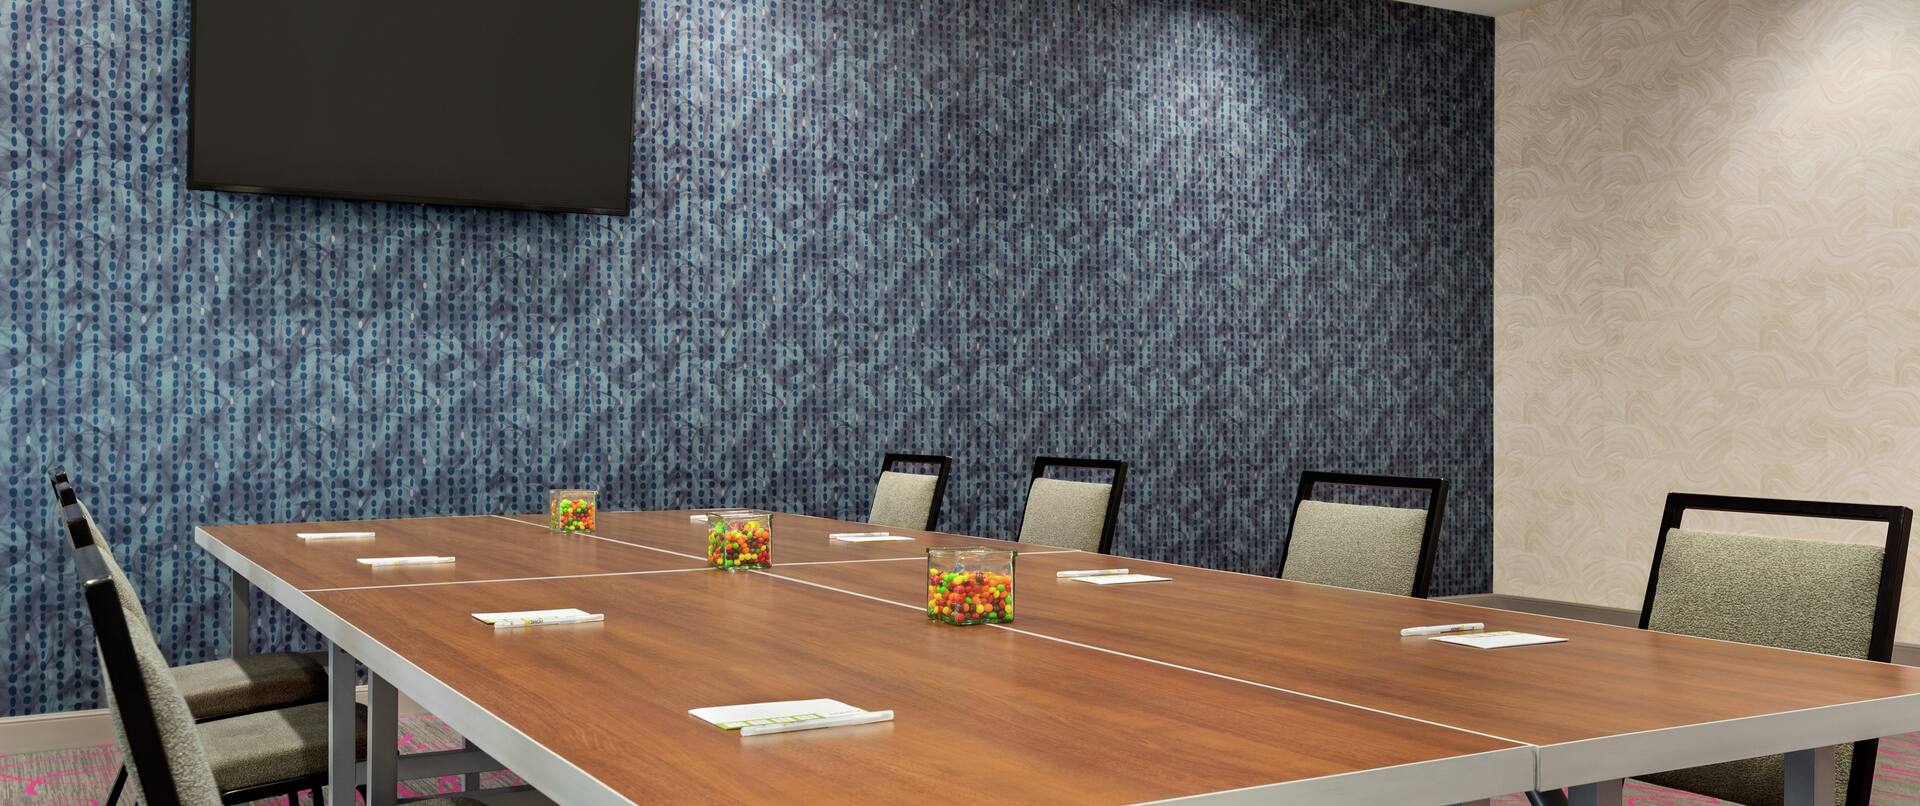 Spacious meeting room with boardroom table, notepads and pens, and TV on wall.